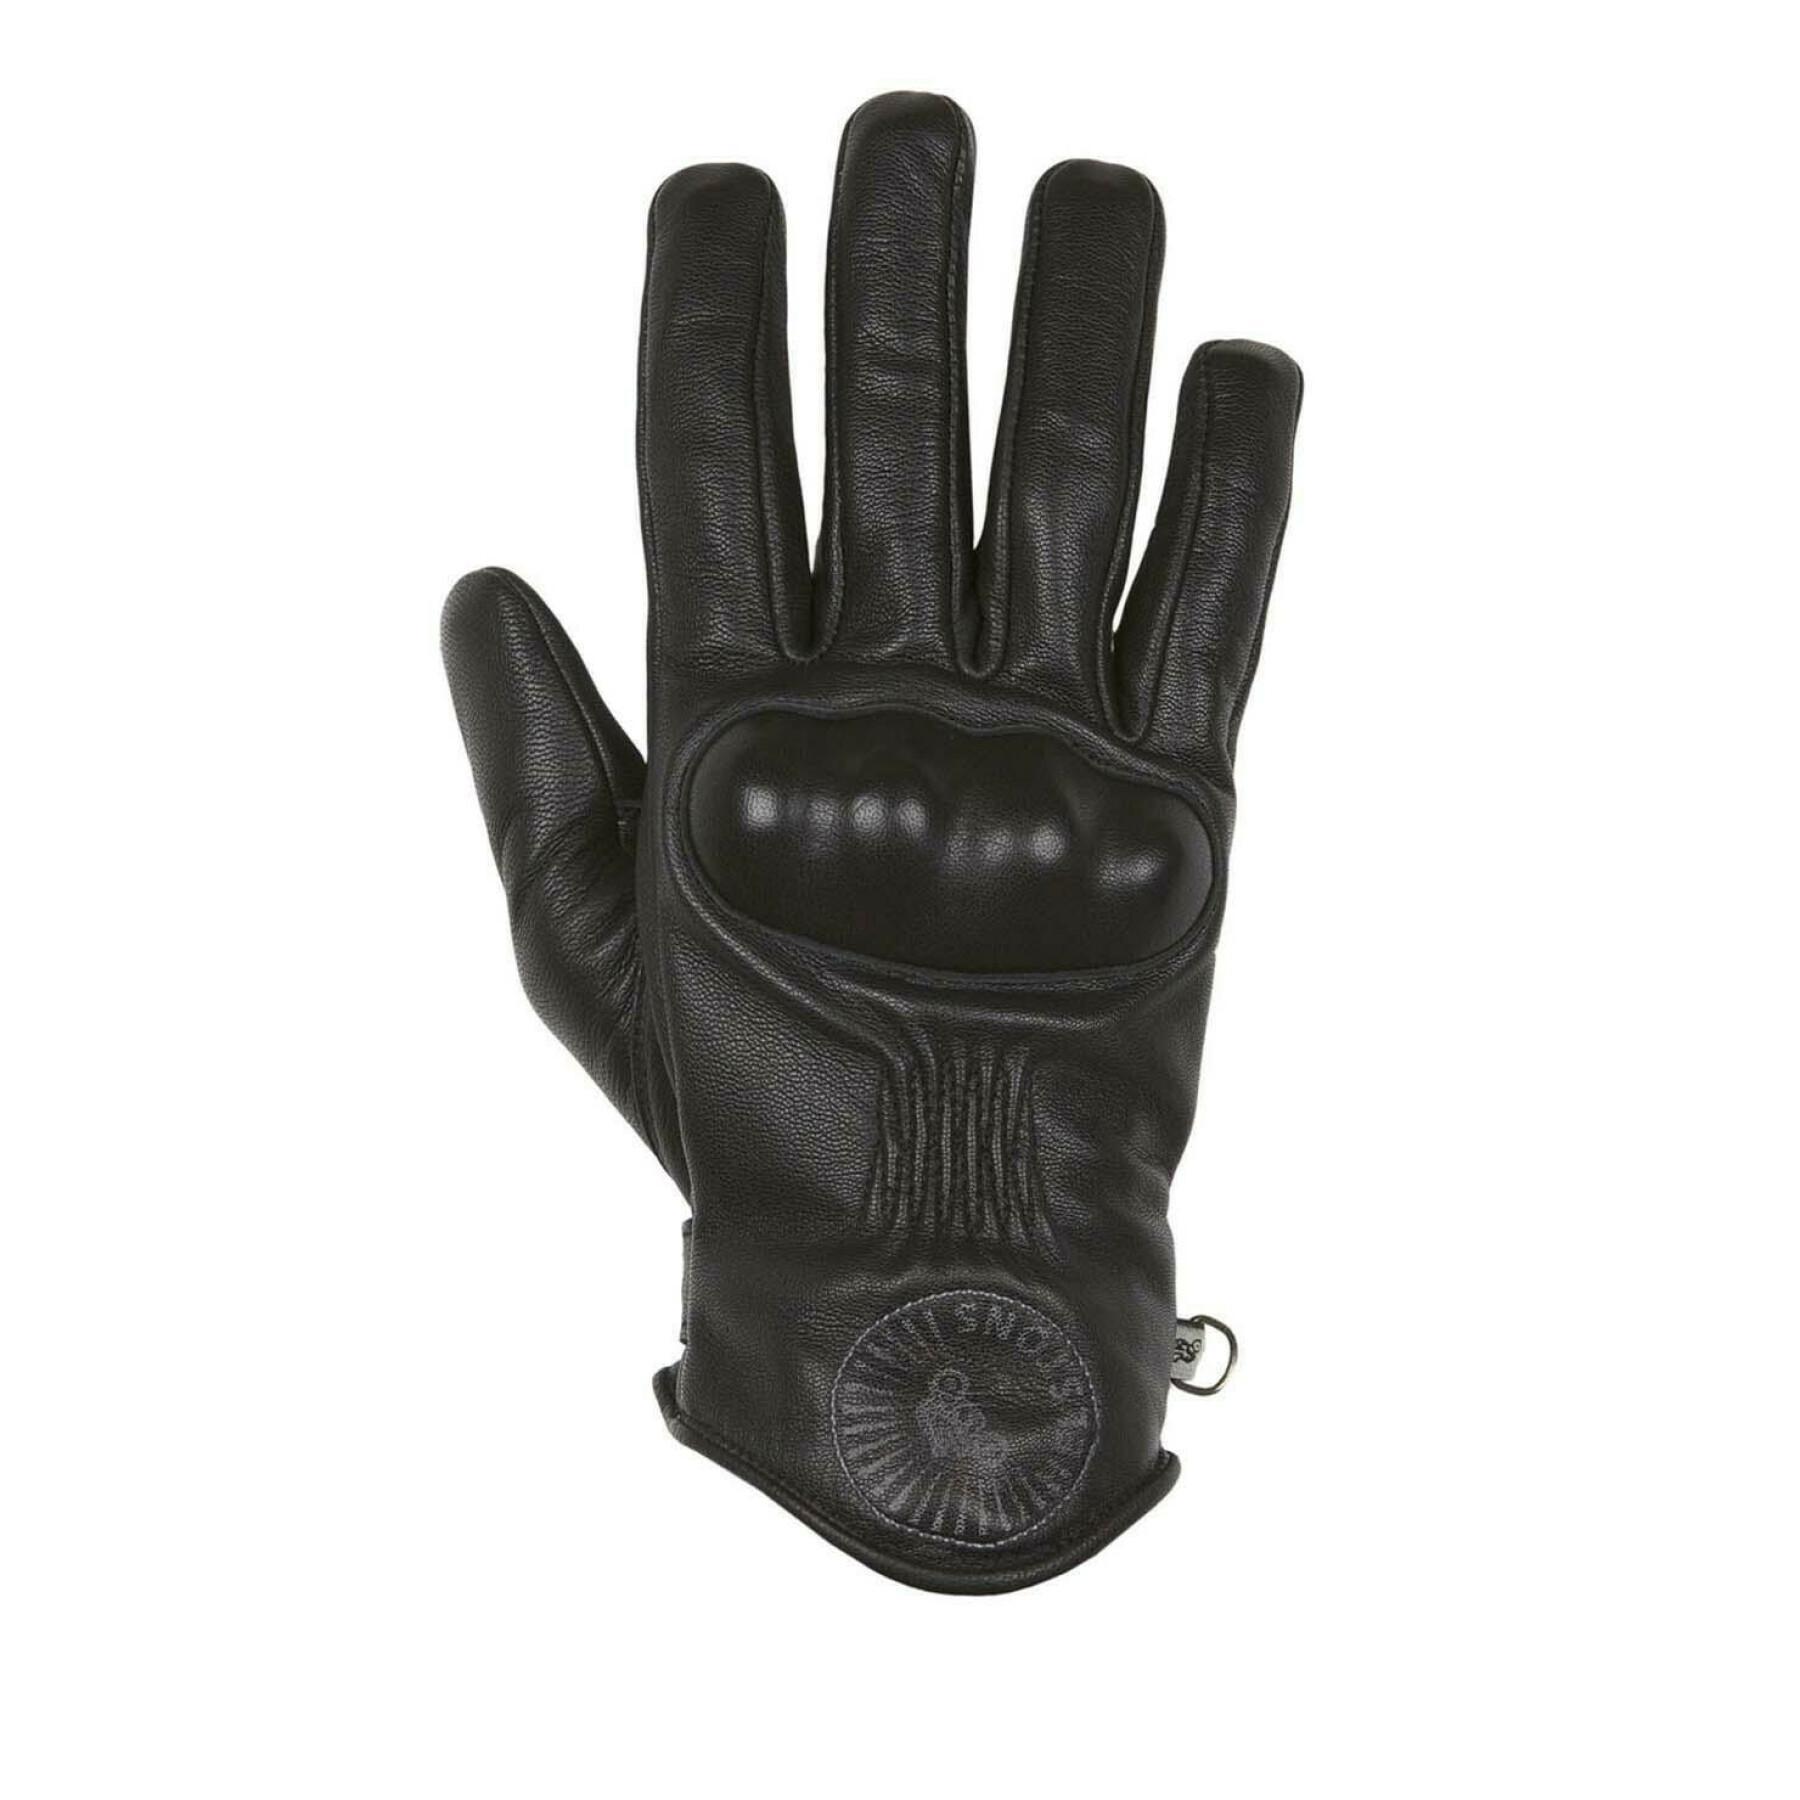 Winter leather motorcycle gloves Helstons snow